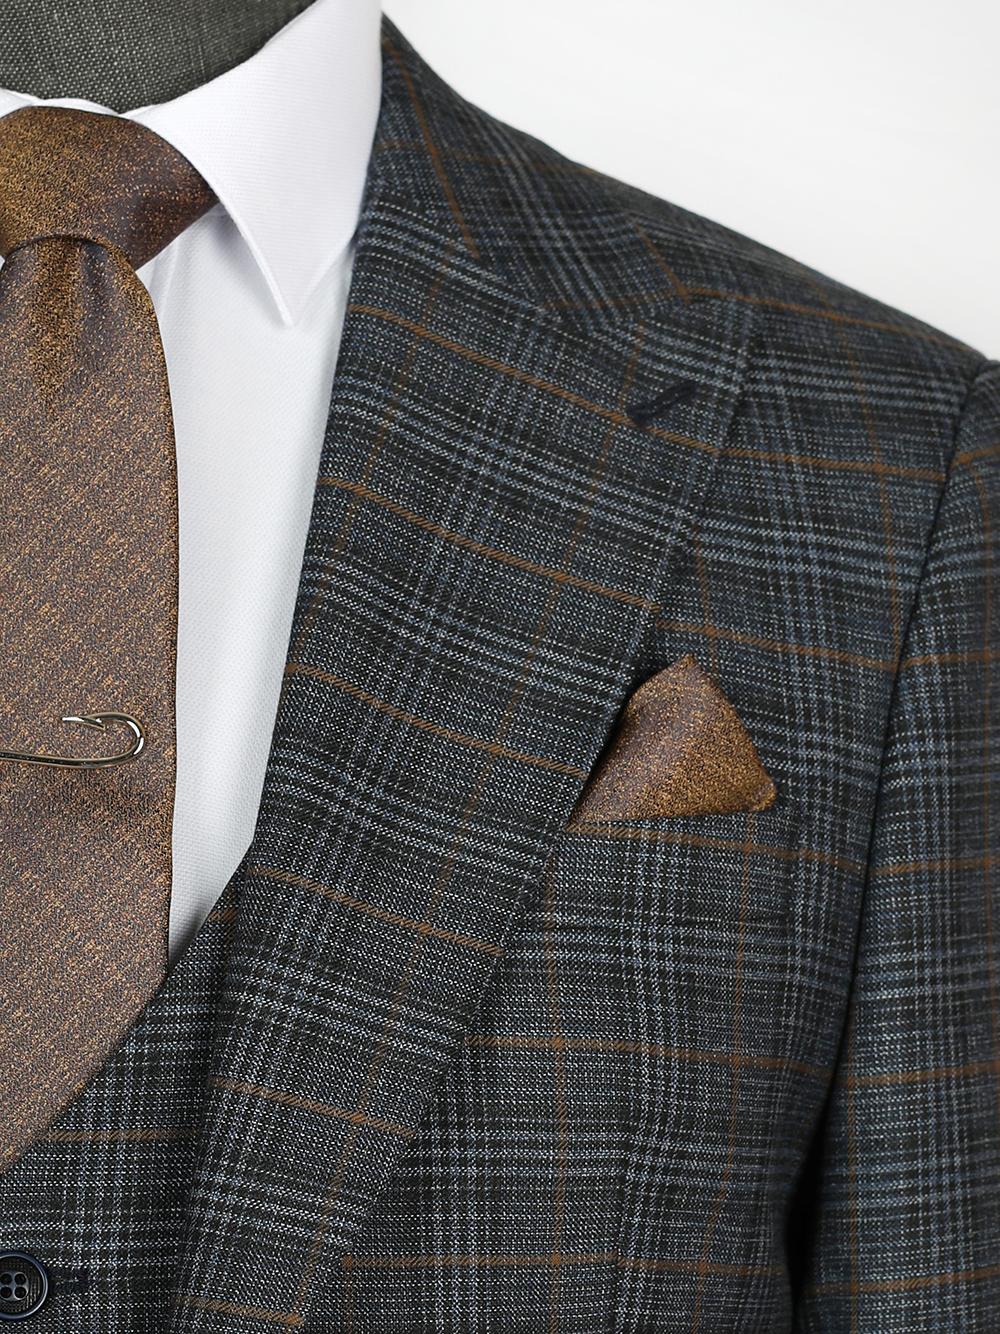 Stylish Three Pieces Of brown Stripes Bespoke Men Suit Tailored